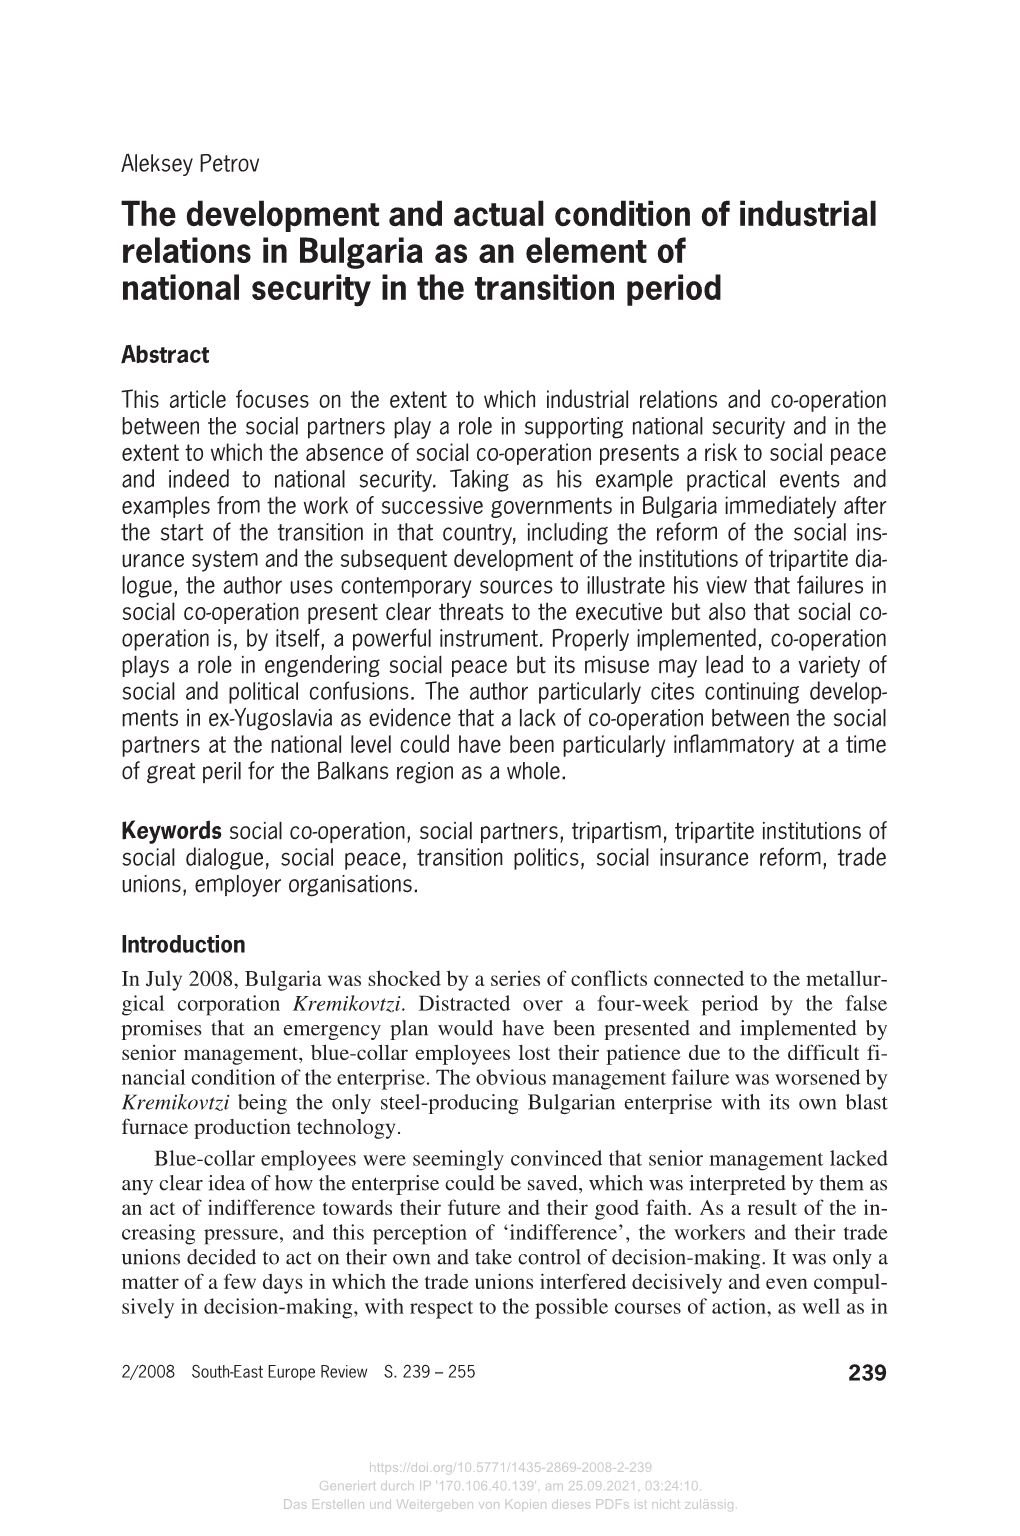 The Development and Actual Condition of Industrial Relations in Bulgaria As an Element of National Security in the Transition Period